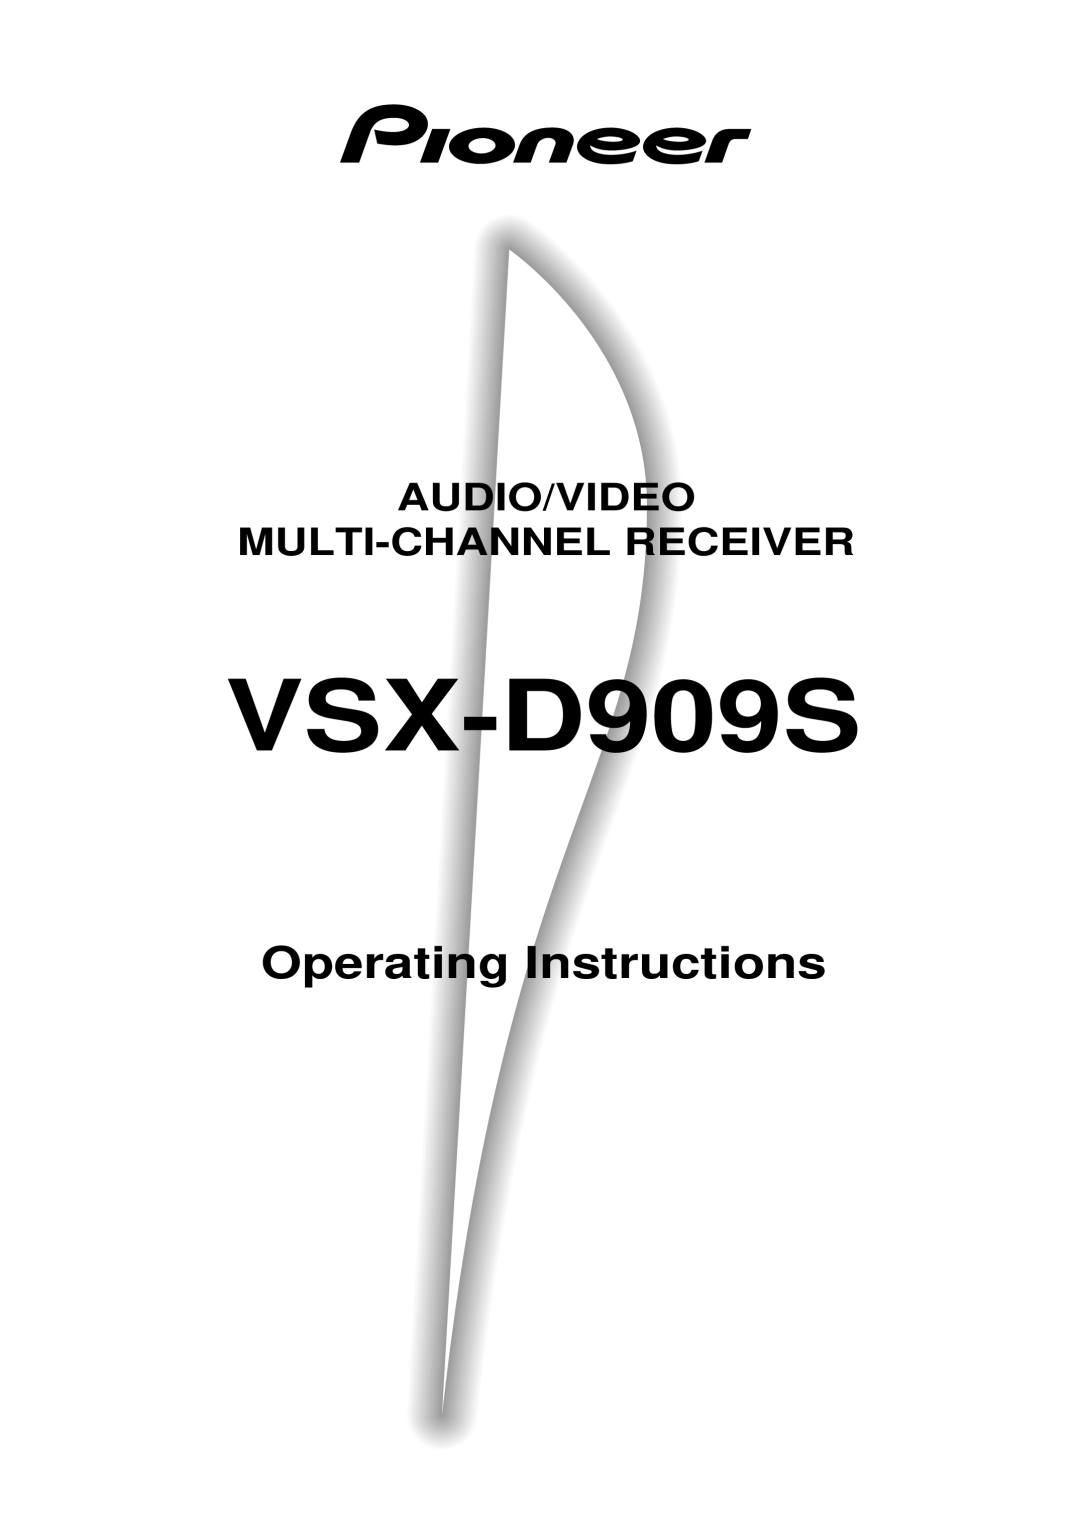 Pioneer VSX-D909S manual Operating Instructions, Audio/Video Multi-Channelreceiver 